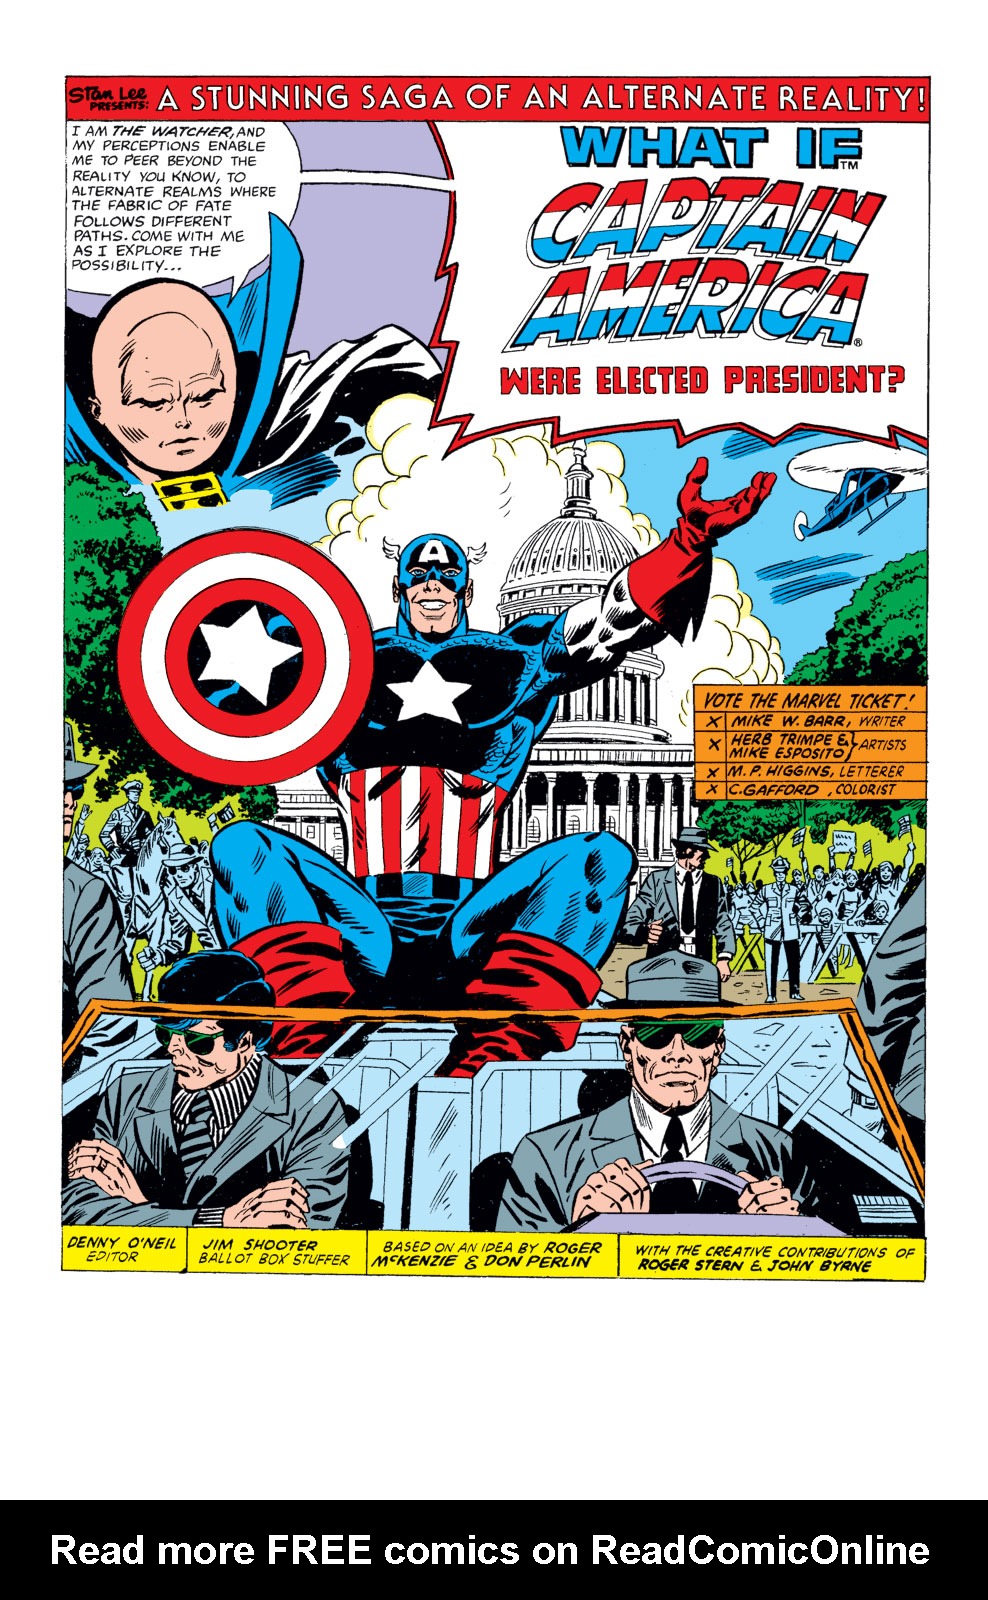 What If? (1977) Issue #26 - Captain America had been elected president #26 - English 2